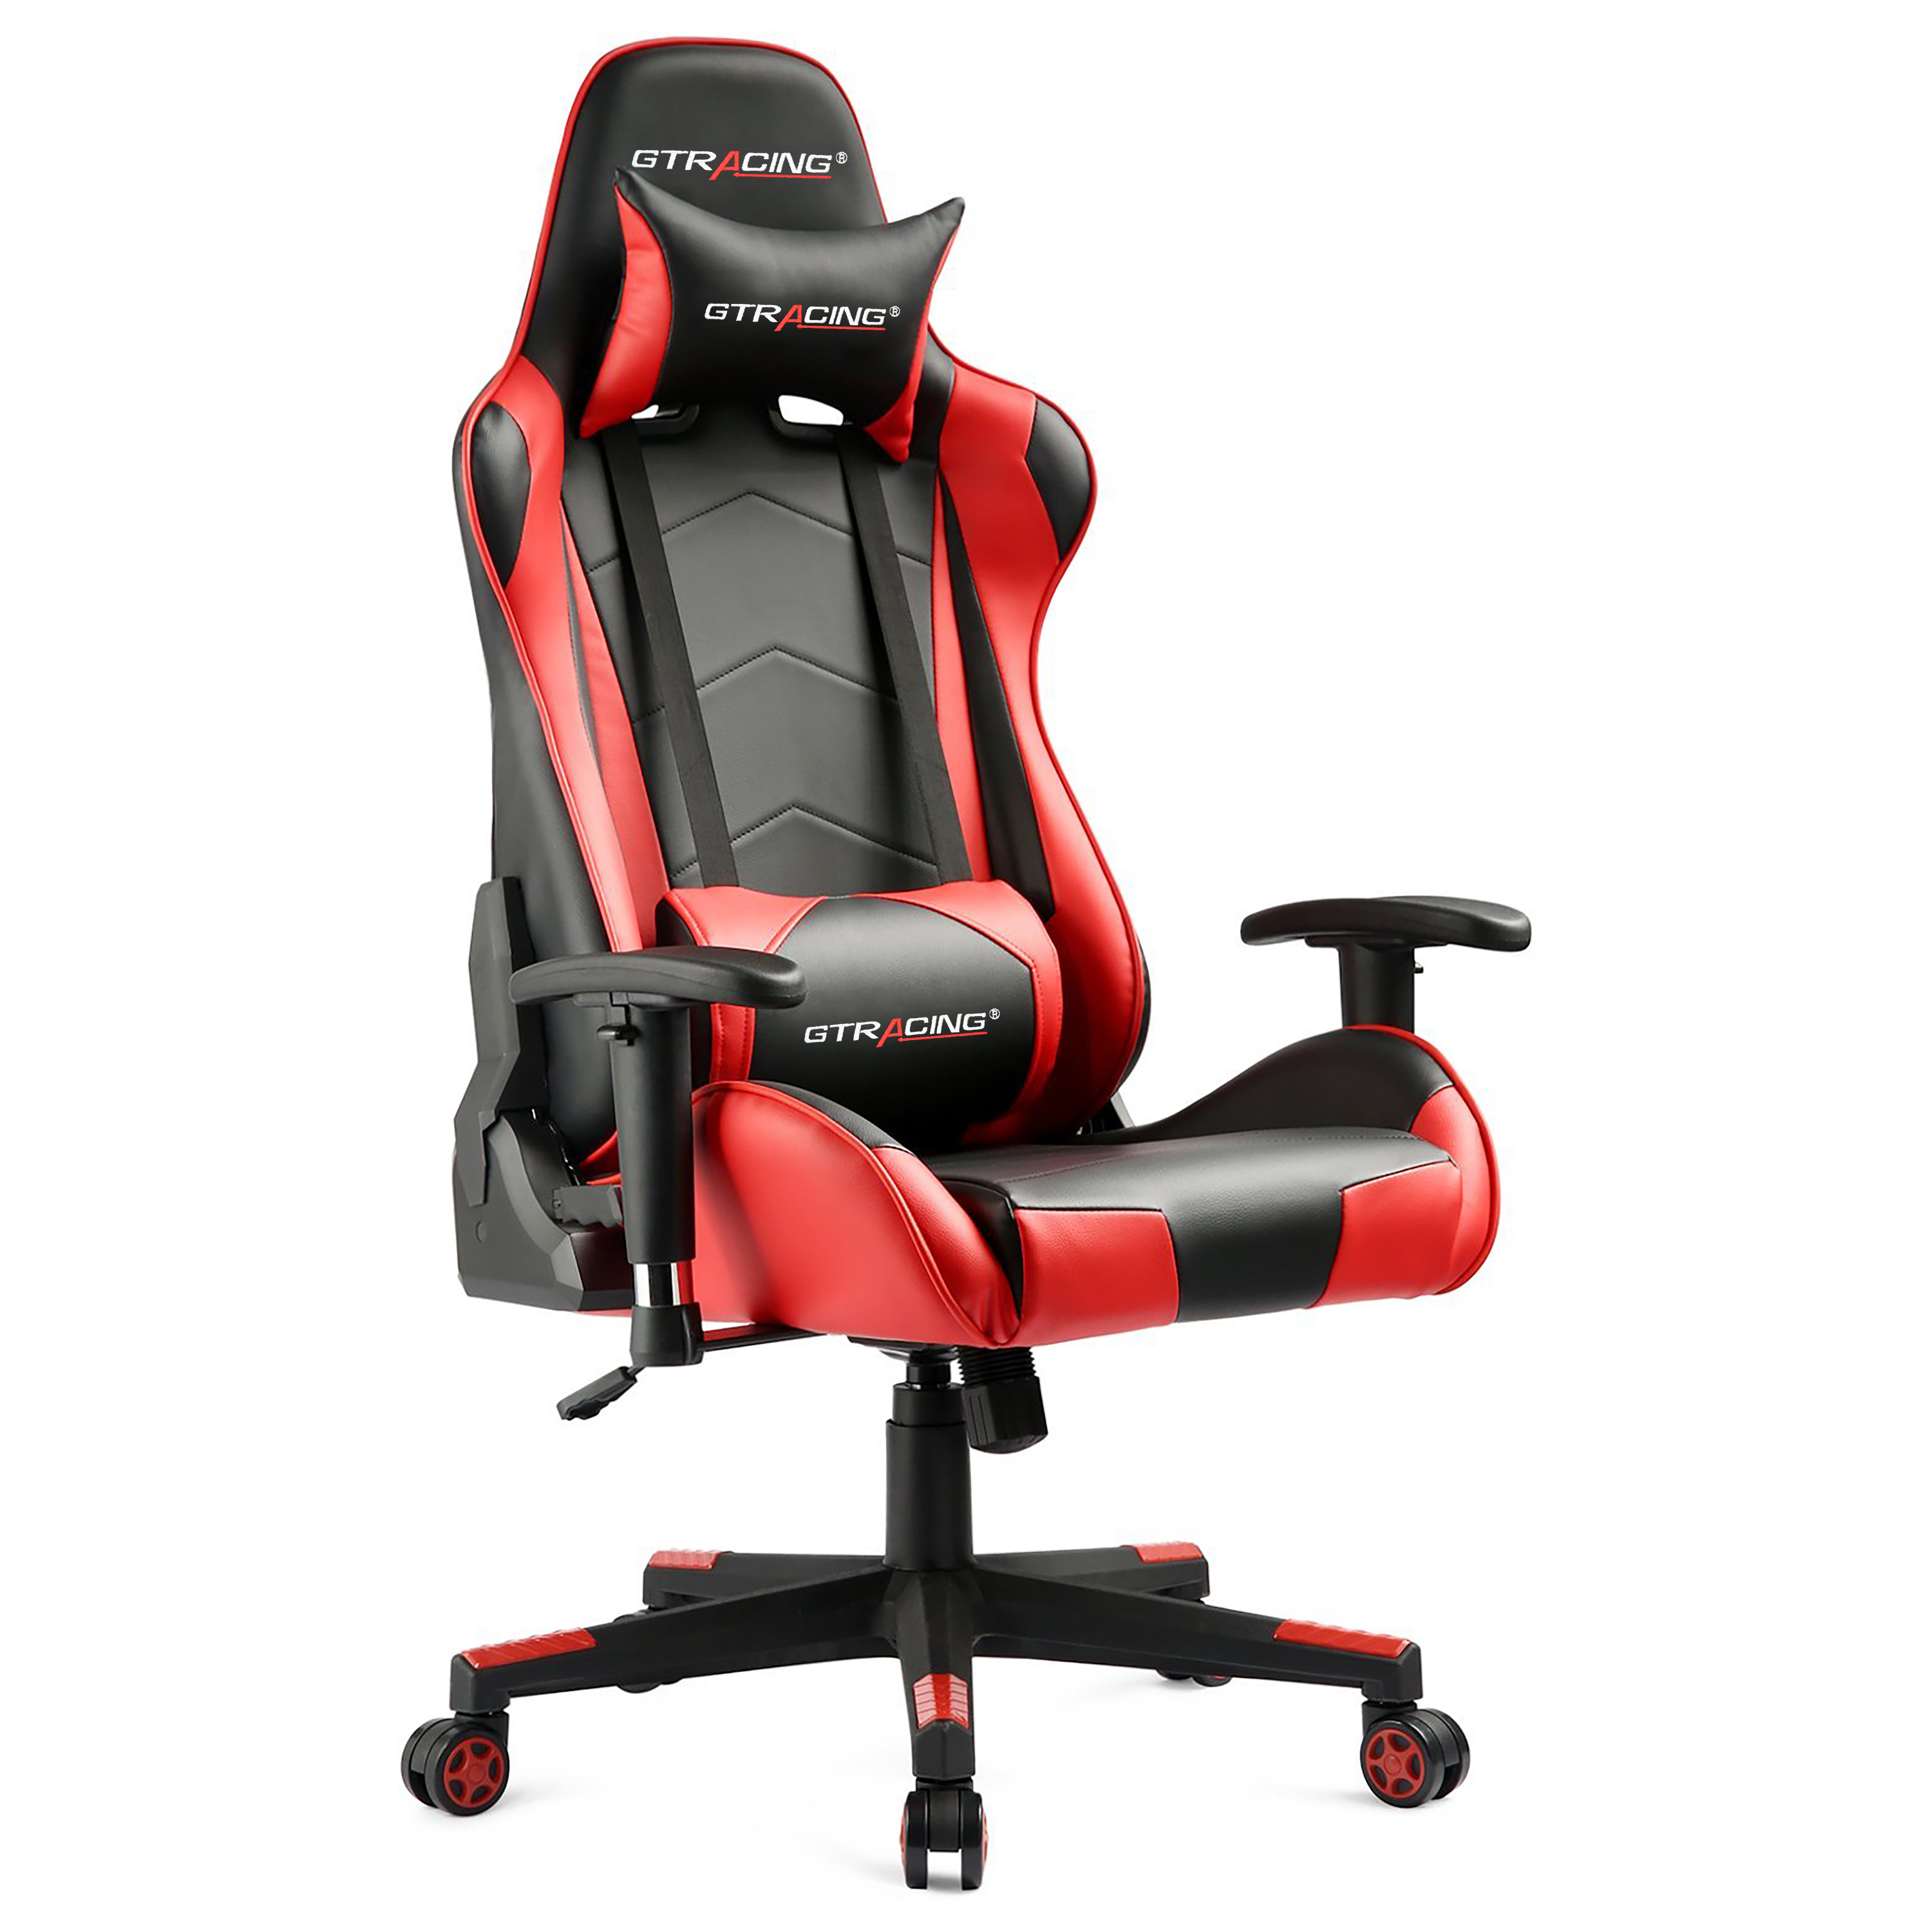 Buy Gtracing Gaming Chair Office Chair In Home Leather With Adjustable Headrest And Lumbar Pillow Red Online In Guatemala 575897870